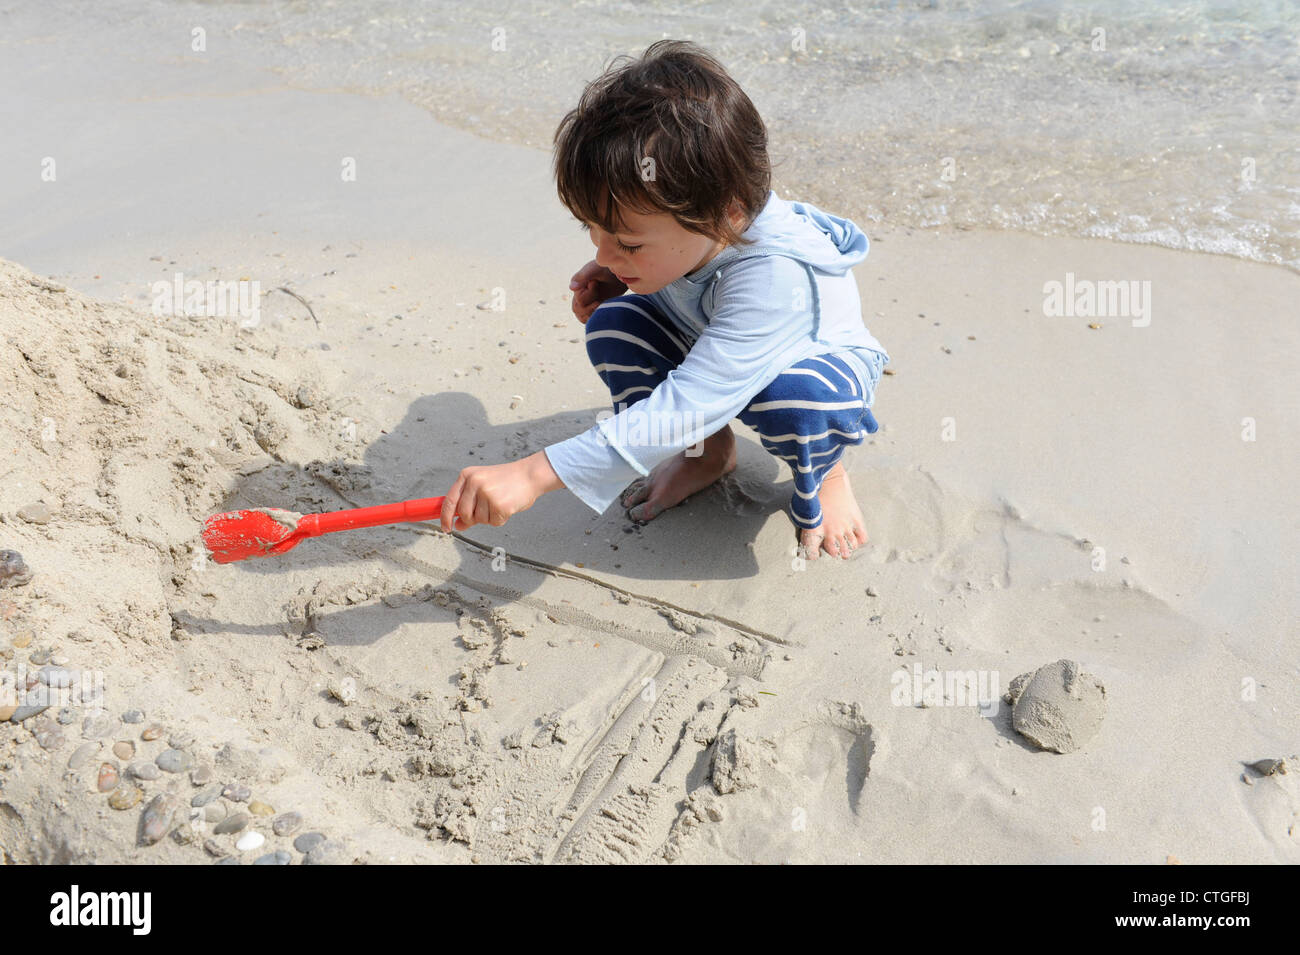 7 YEAR OLD ENGLISH BOY BUILDING A SANDCASTLE ON THE BEACH AT FORMENTOR IN MAJORCA , SPAIN Stock Photo